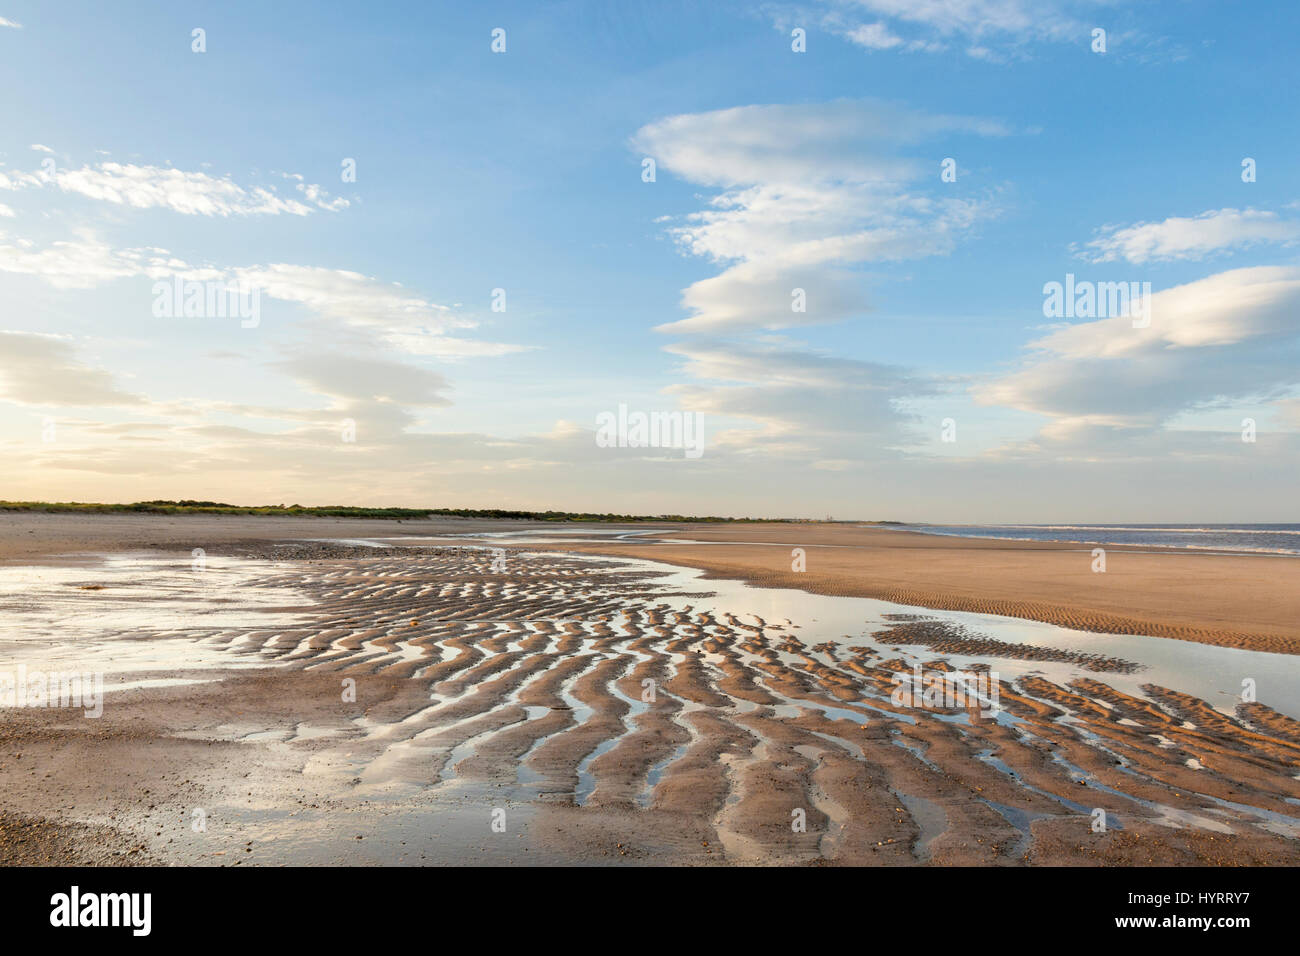 Sand ripples on an empty beach in the evening formed by the outgoing tide, Gibraltar Point near Skegness, Lincolnshire coast, England, UK Stock Photo